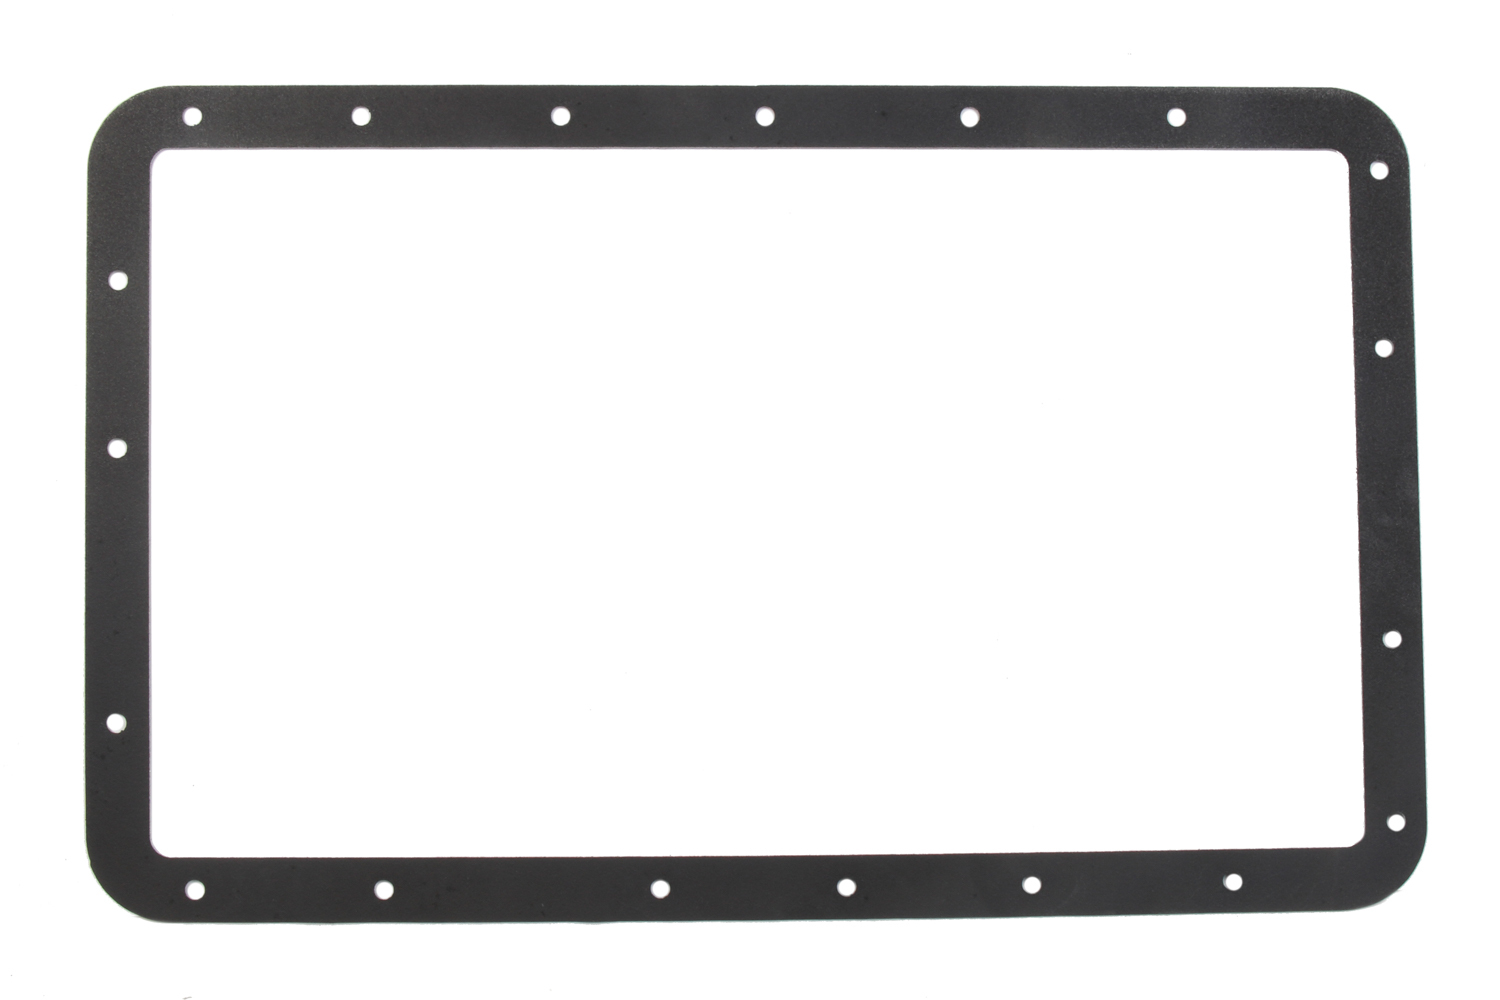 Cometic Gaskets C14118-060 Transmission Pan Gasket, 0.060 in Thick, Rubber Coated Aluminum, Toyota A340E / A340F Transmission, Each